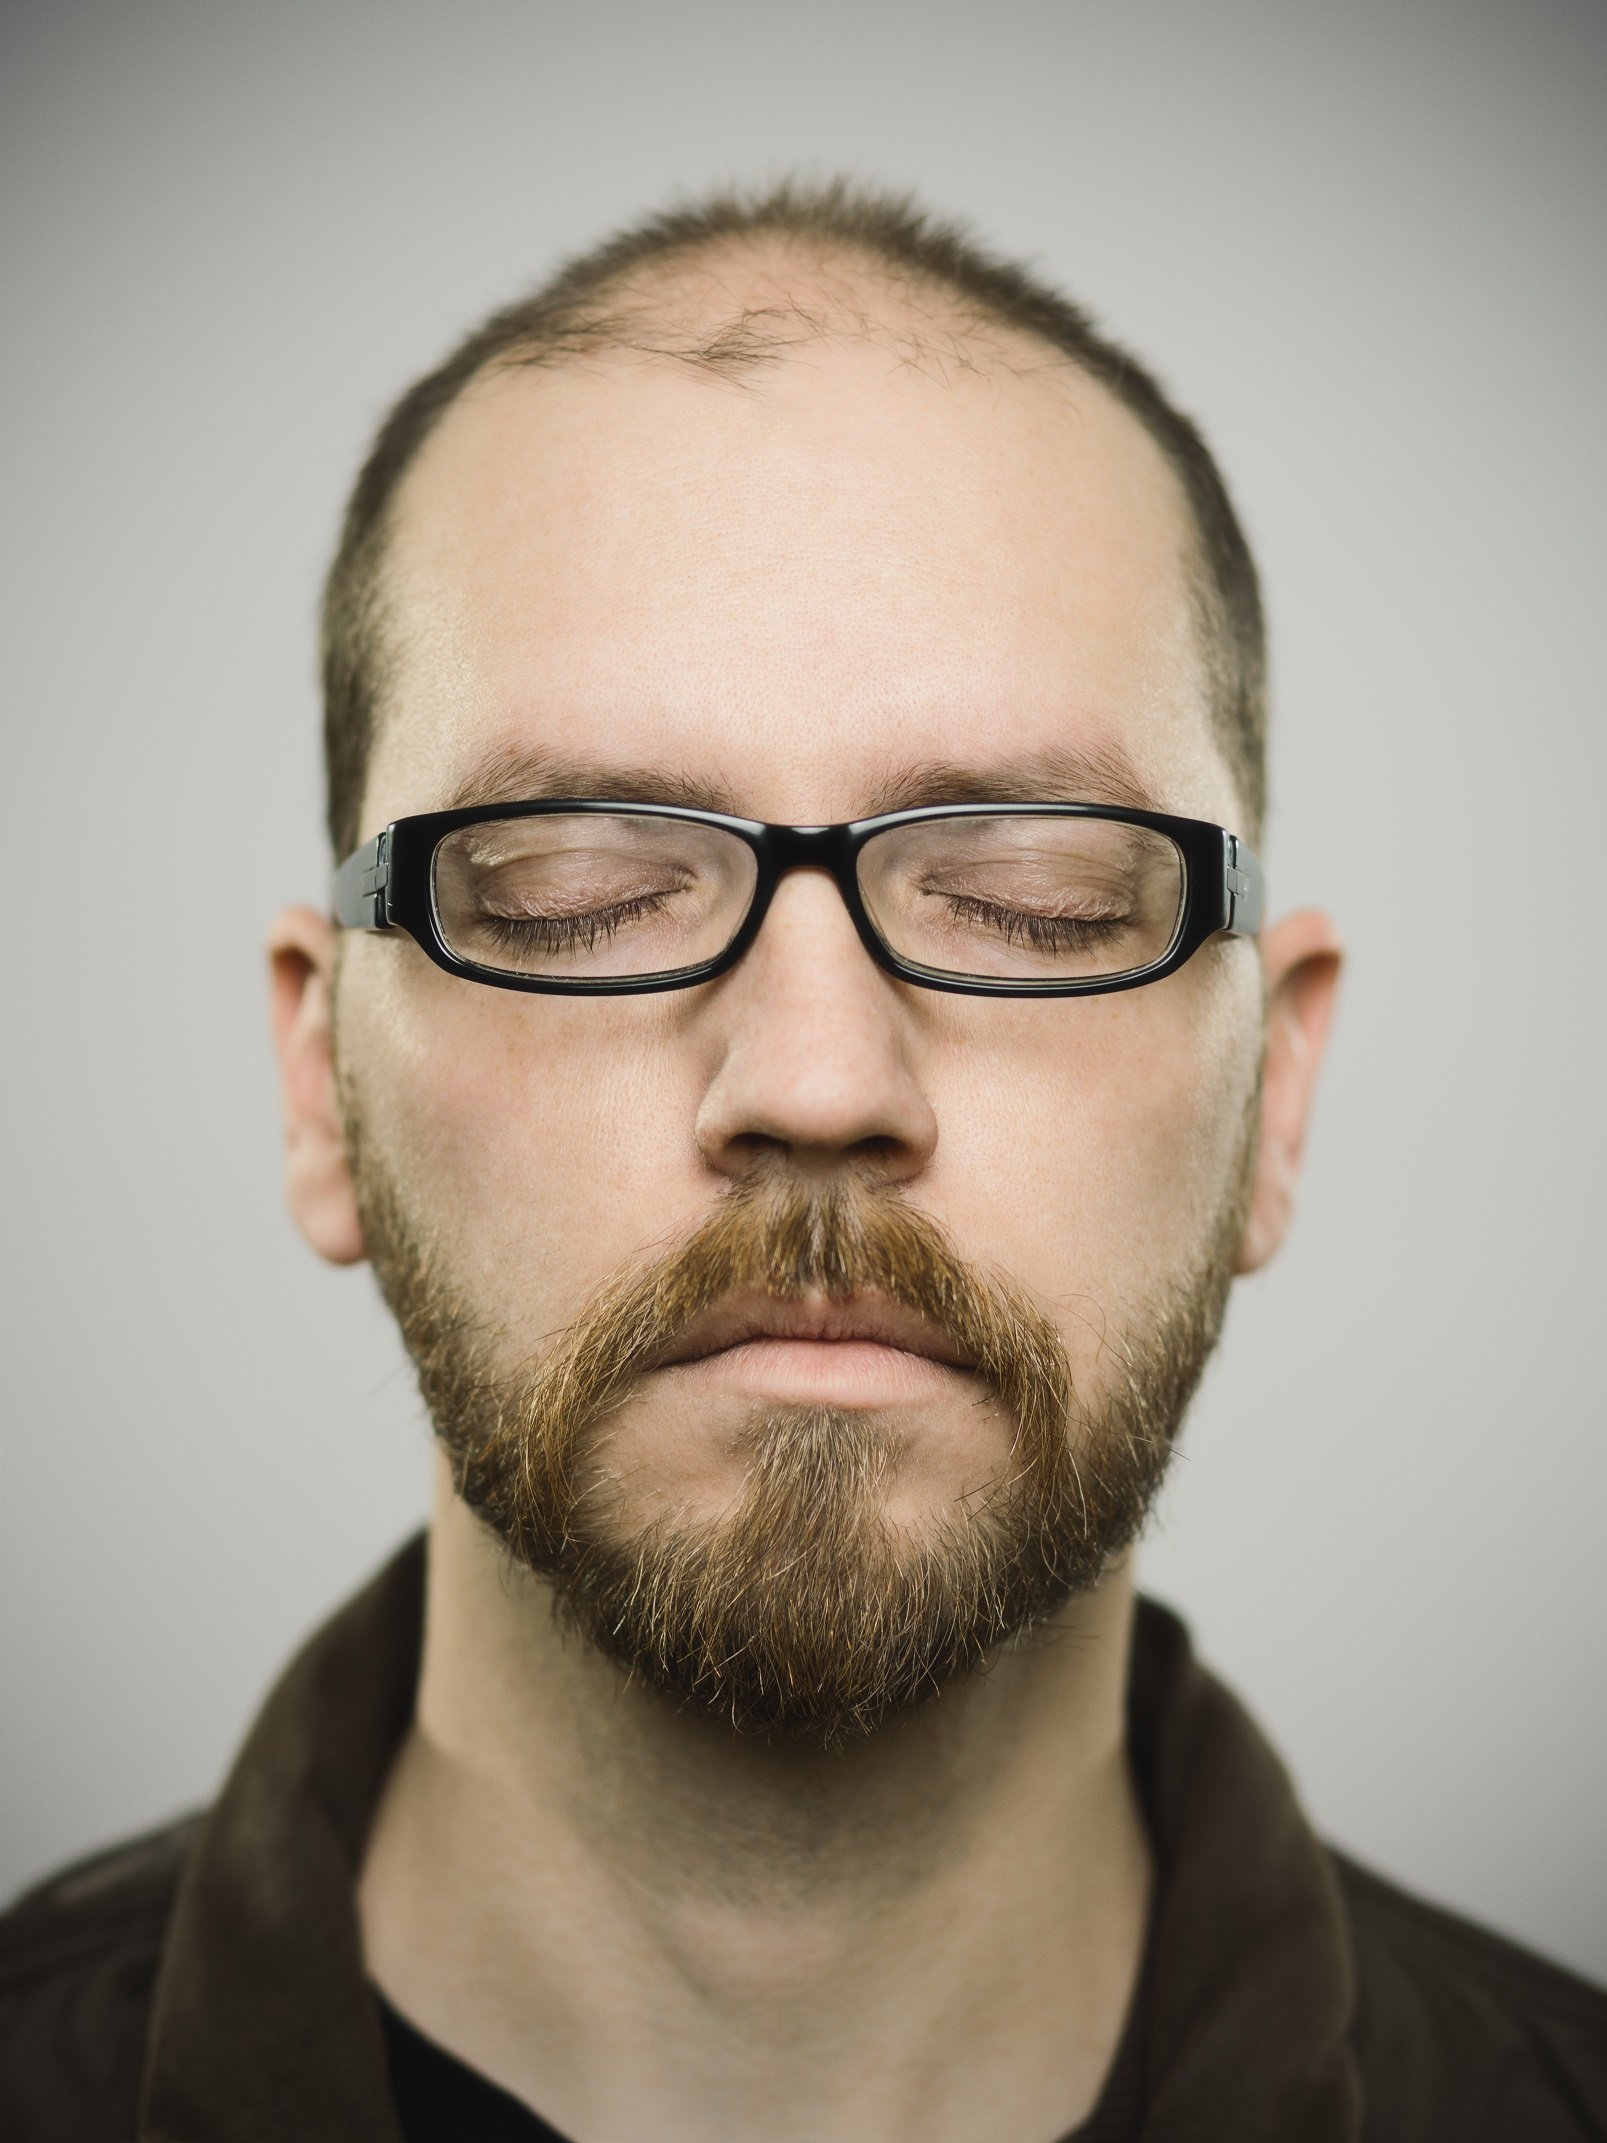 balding guy with glasses